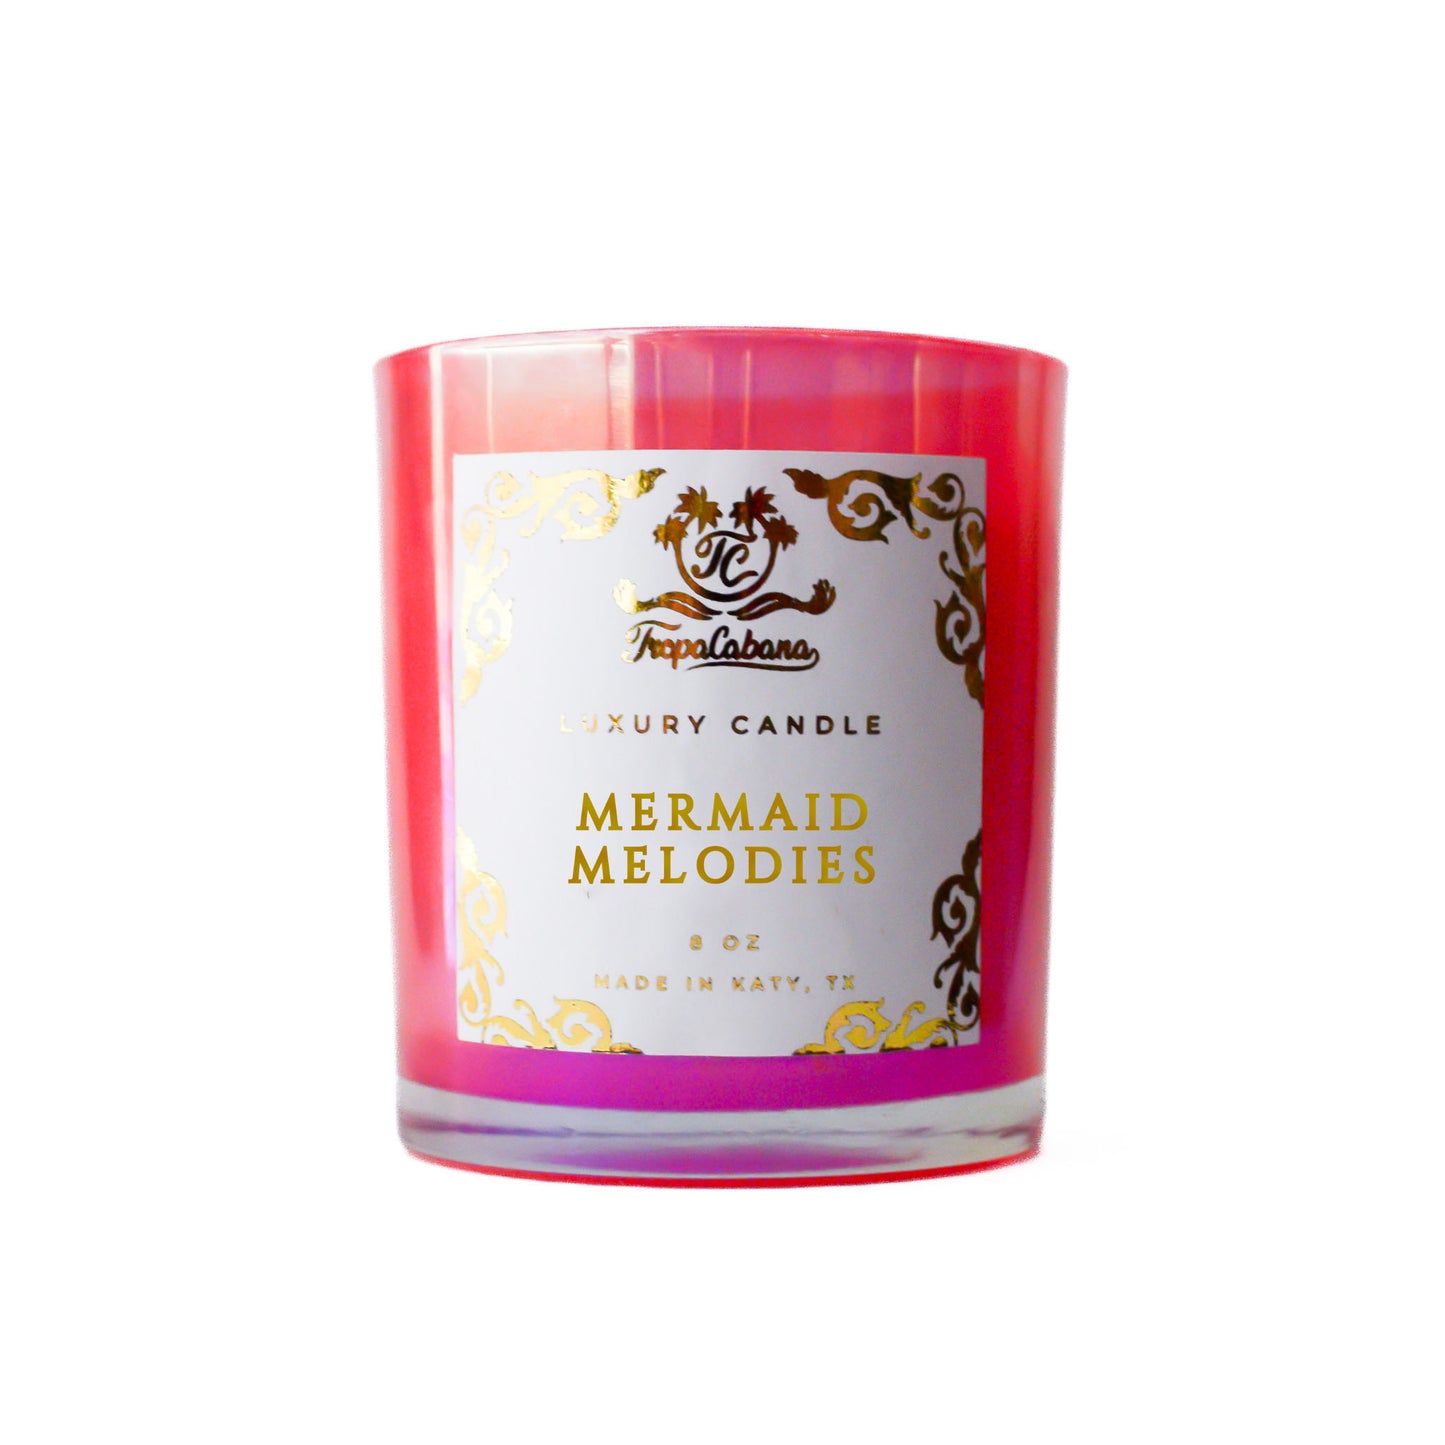 Mermaid Melodies Pink Iridescent Candle